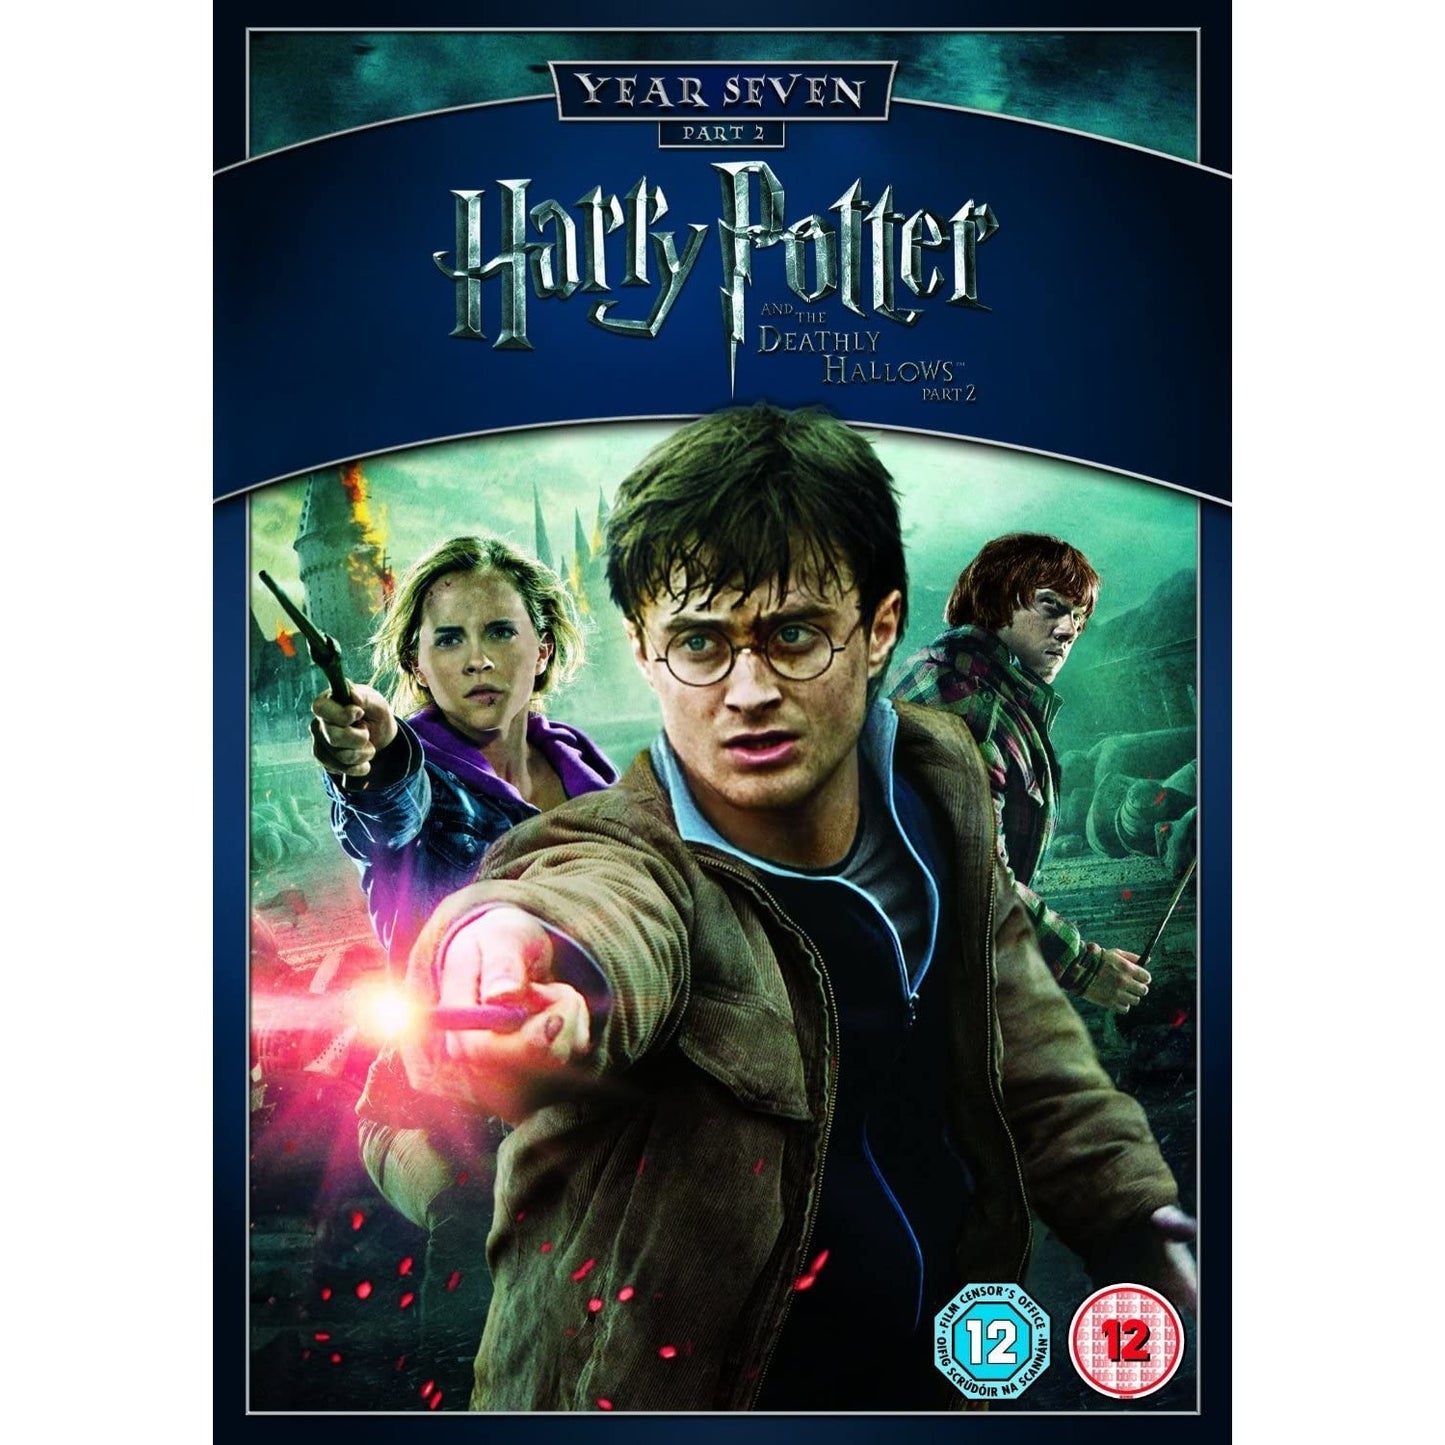 Blu-Ray - Harry Potter And The Deathly Hallows Part 2 (12) Preowned